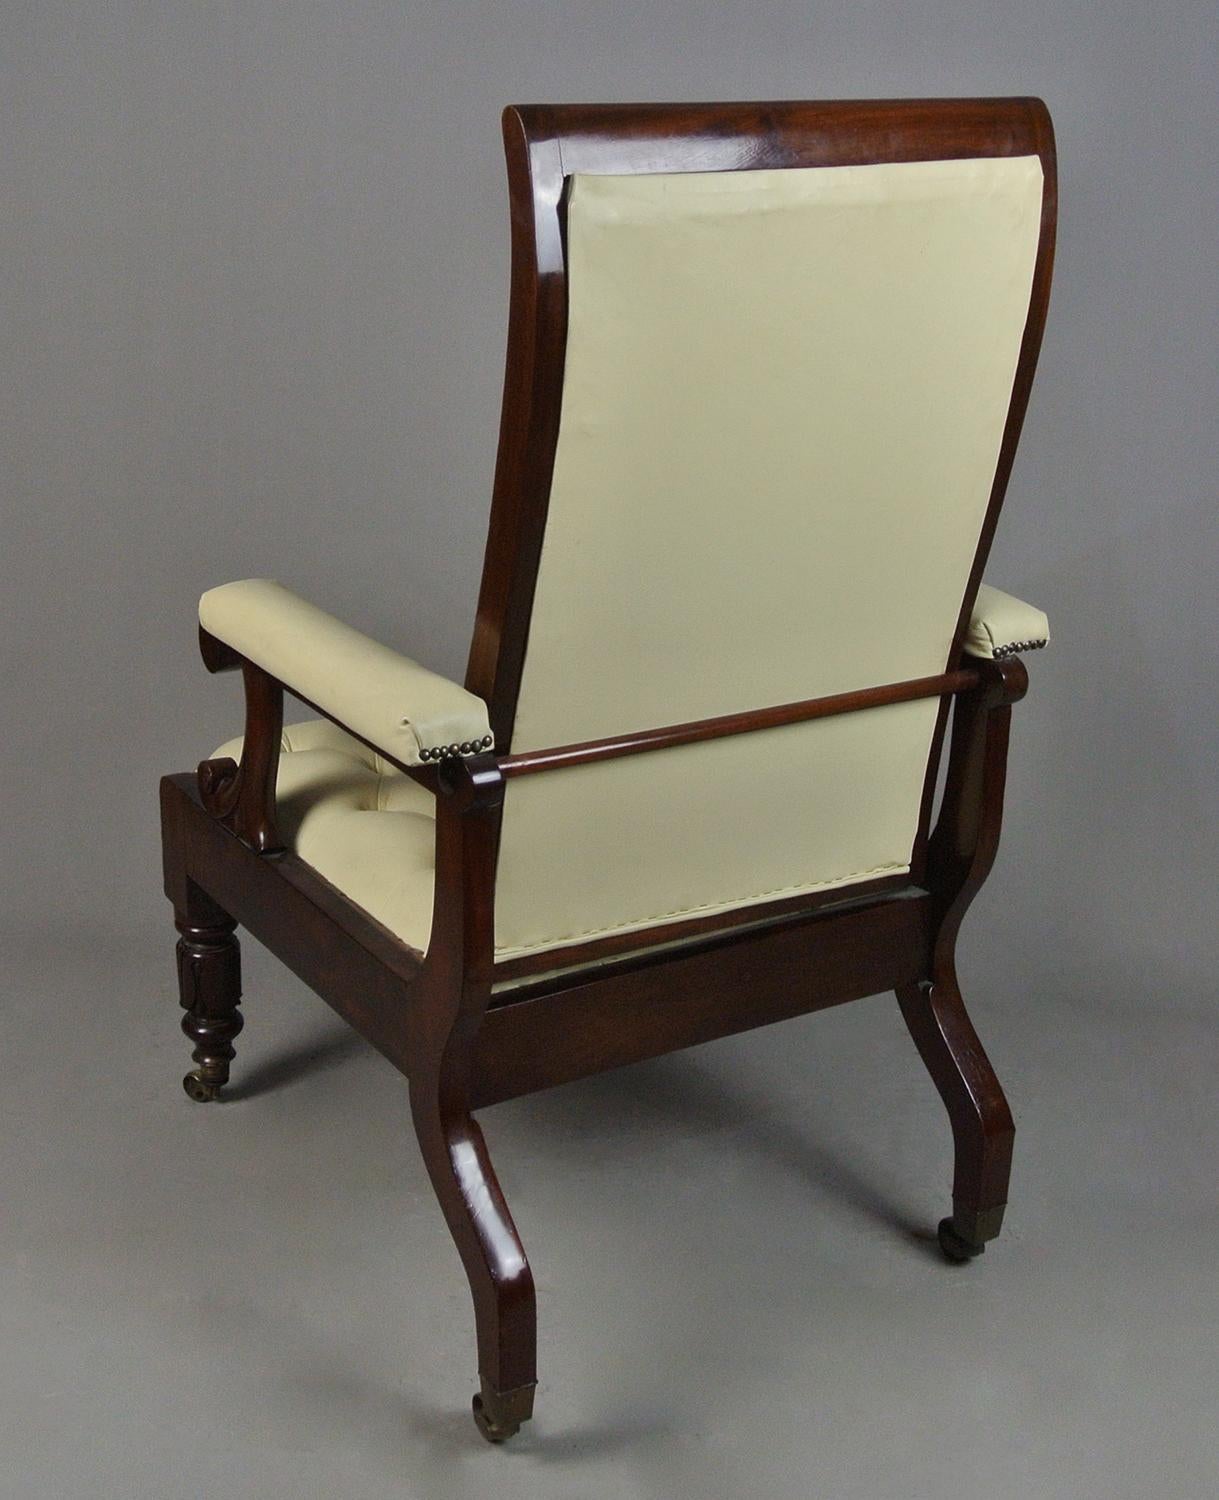 Regency Solid Mahogany ‘Daws Patent’ Reclining Chair c. 1830 For Sale 3